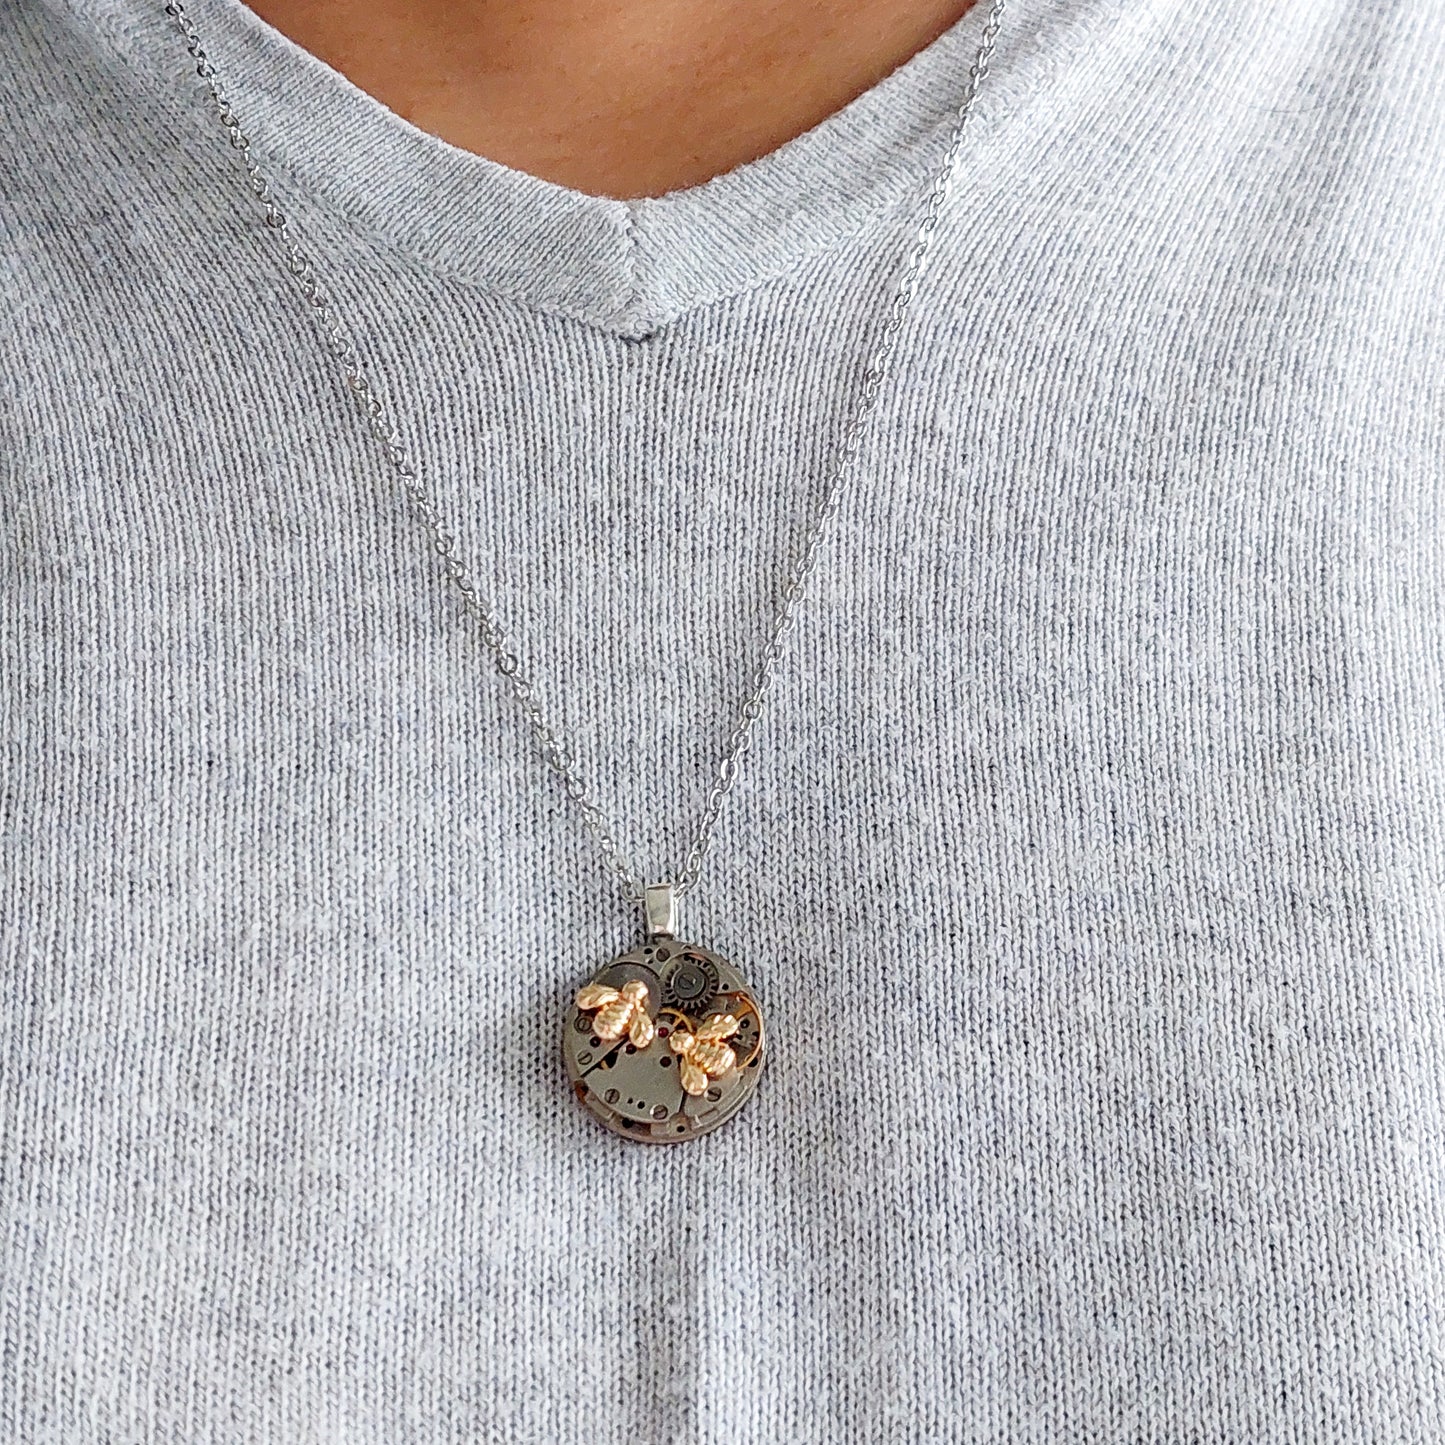 NEW!! Mini timepiece pendant with tiny golden bees